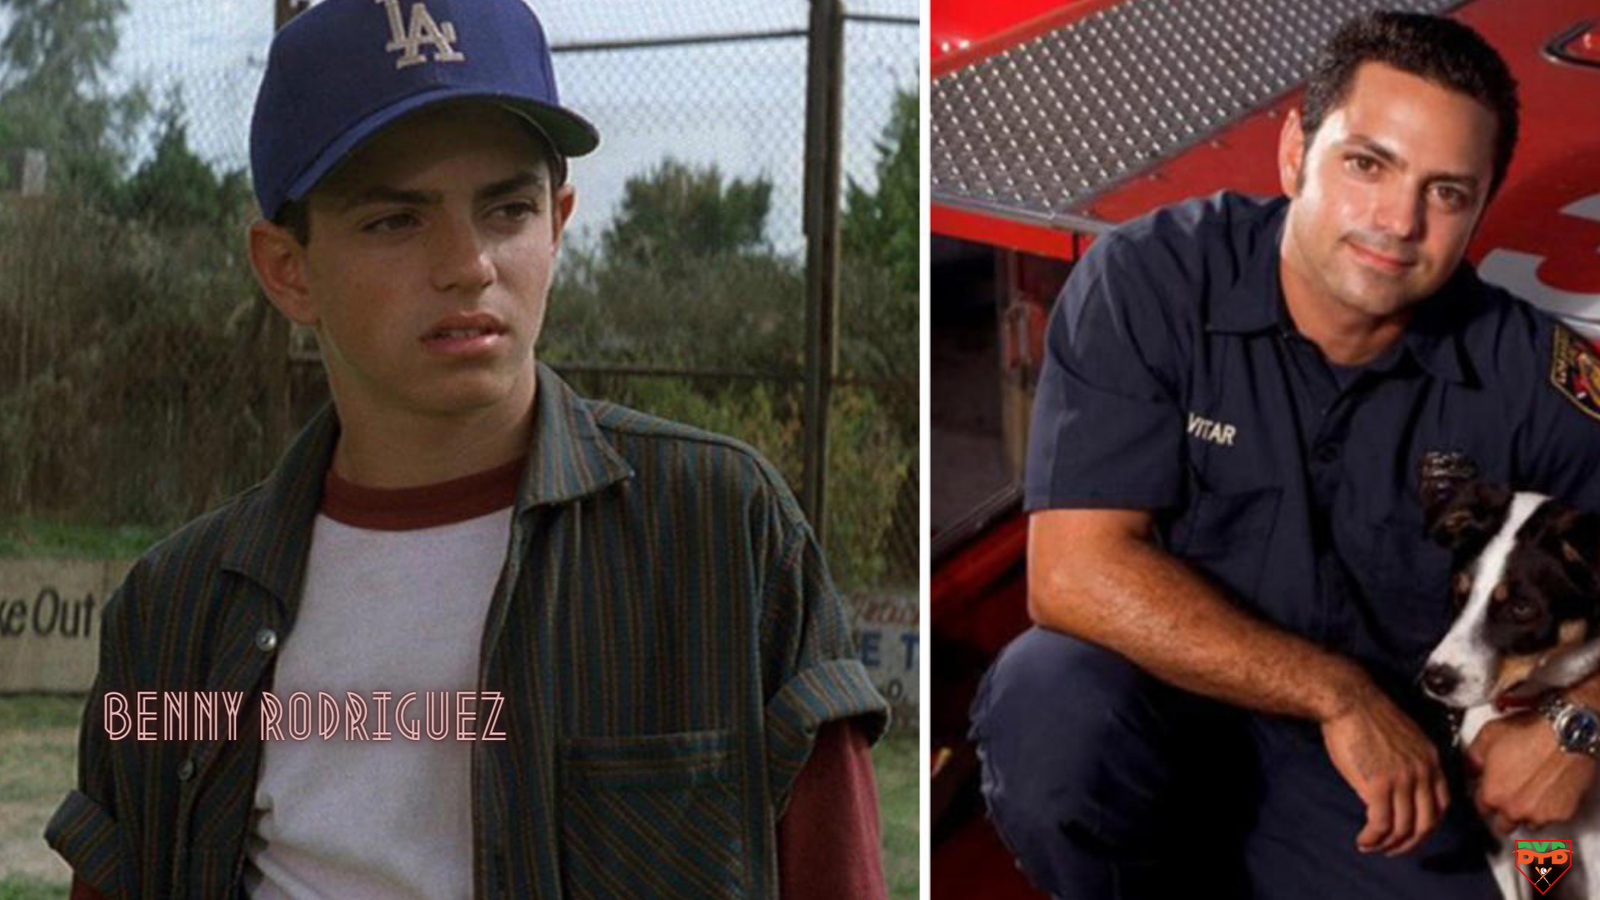 Where are they now? Benny “The Jet” Rodriguez